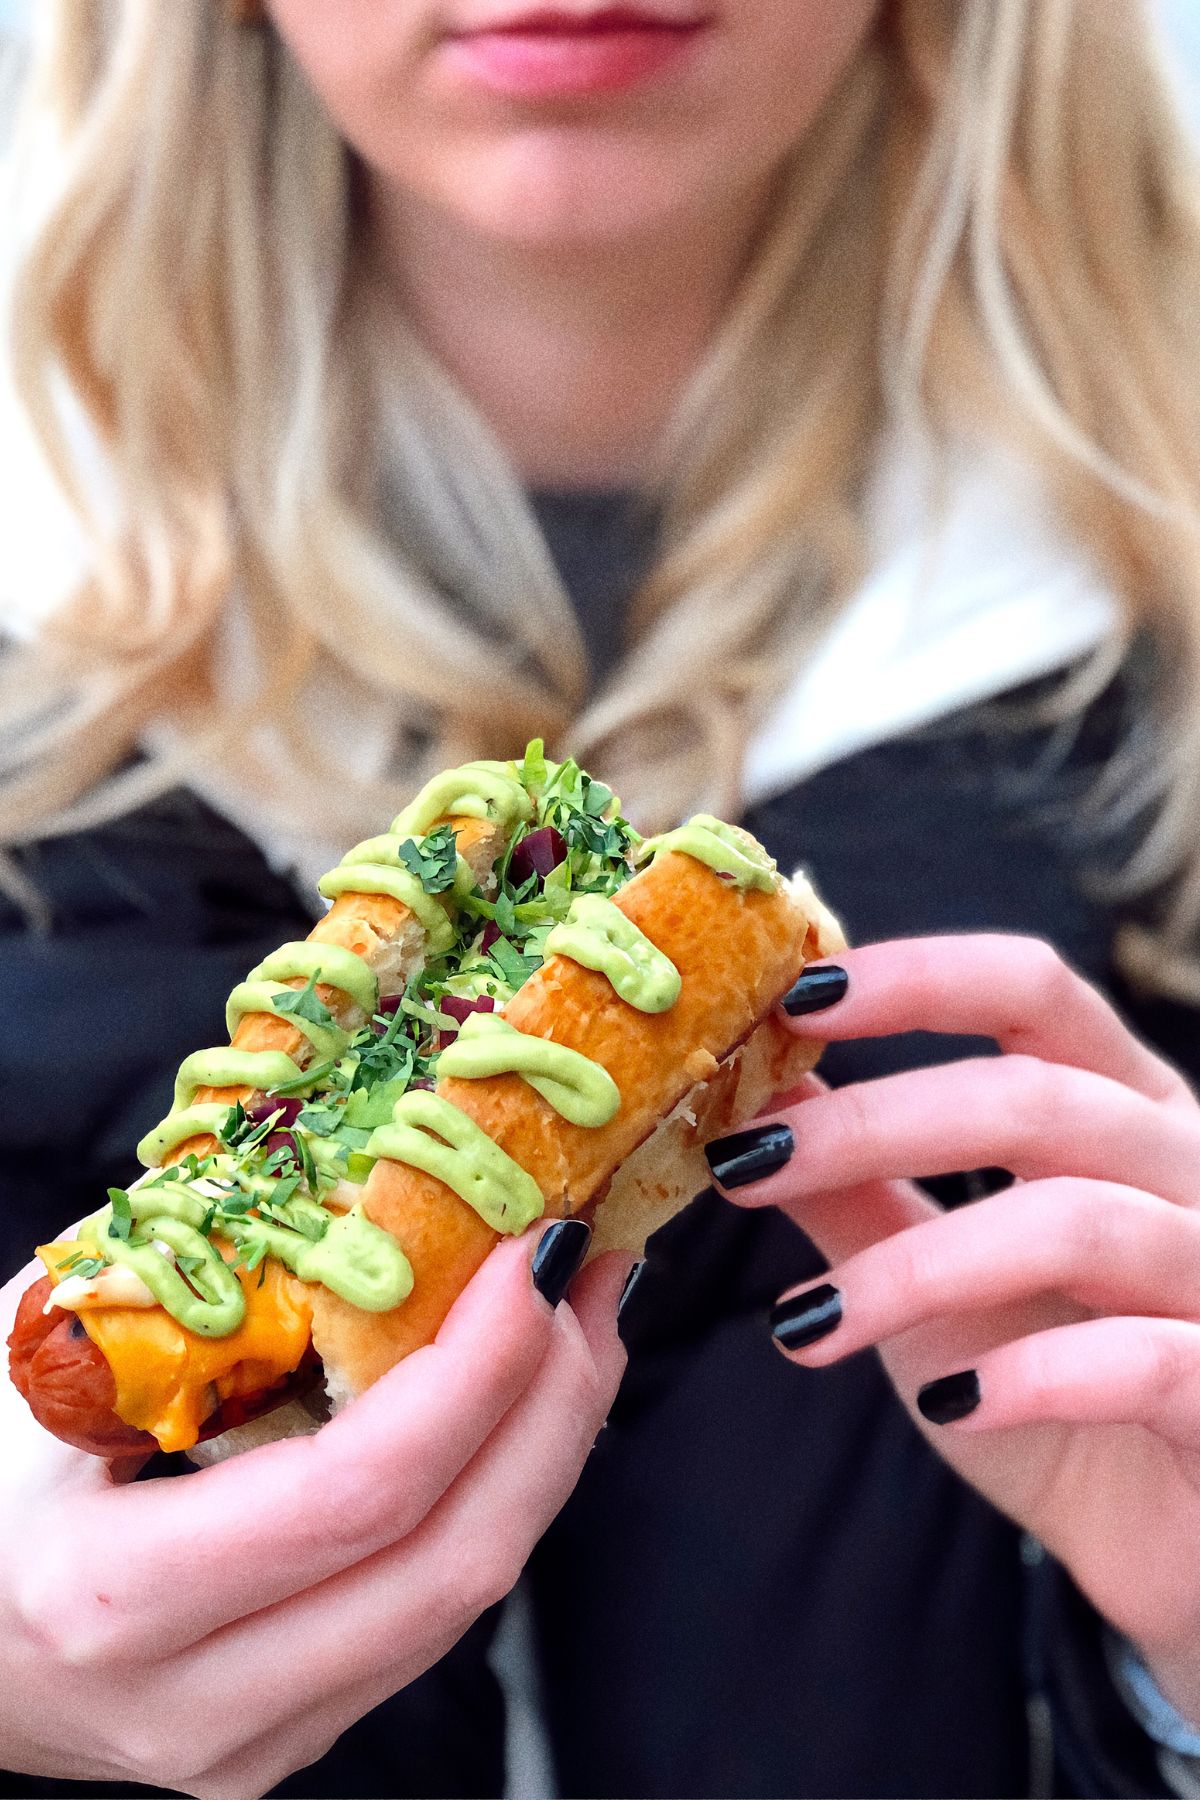 A blond girl is eating a specialty hot dog.